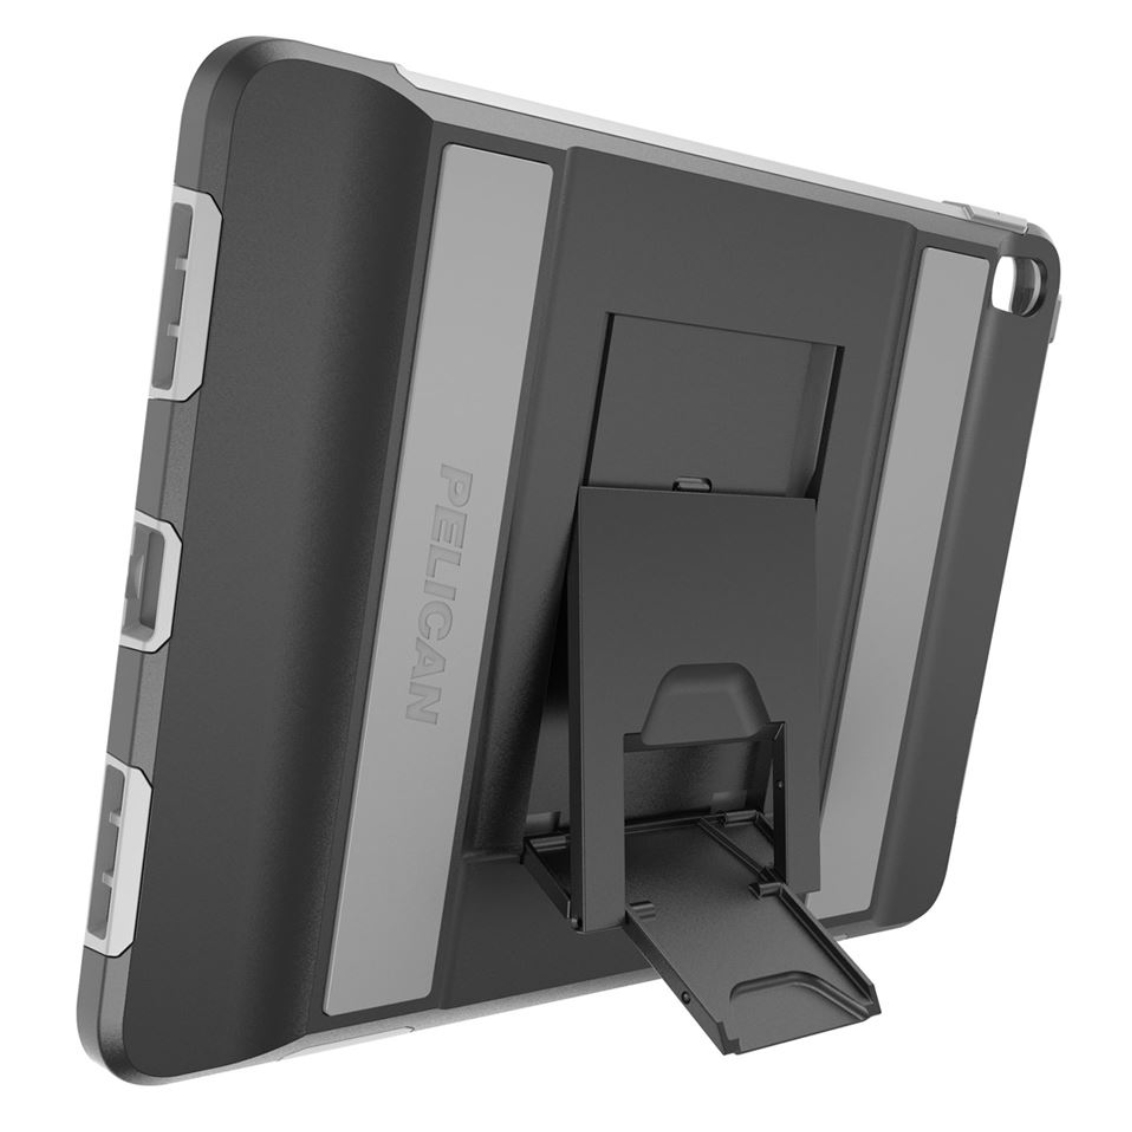 Primary image for Case-Mate Pelican Voyager Series Case - For iPad Pro 11-inch (2nd Gen, 2020) 